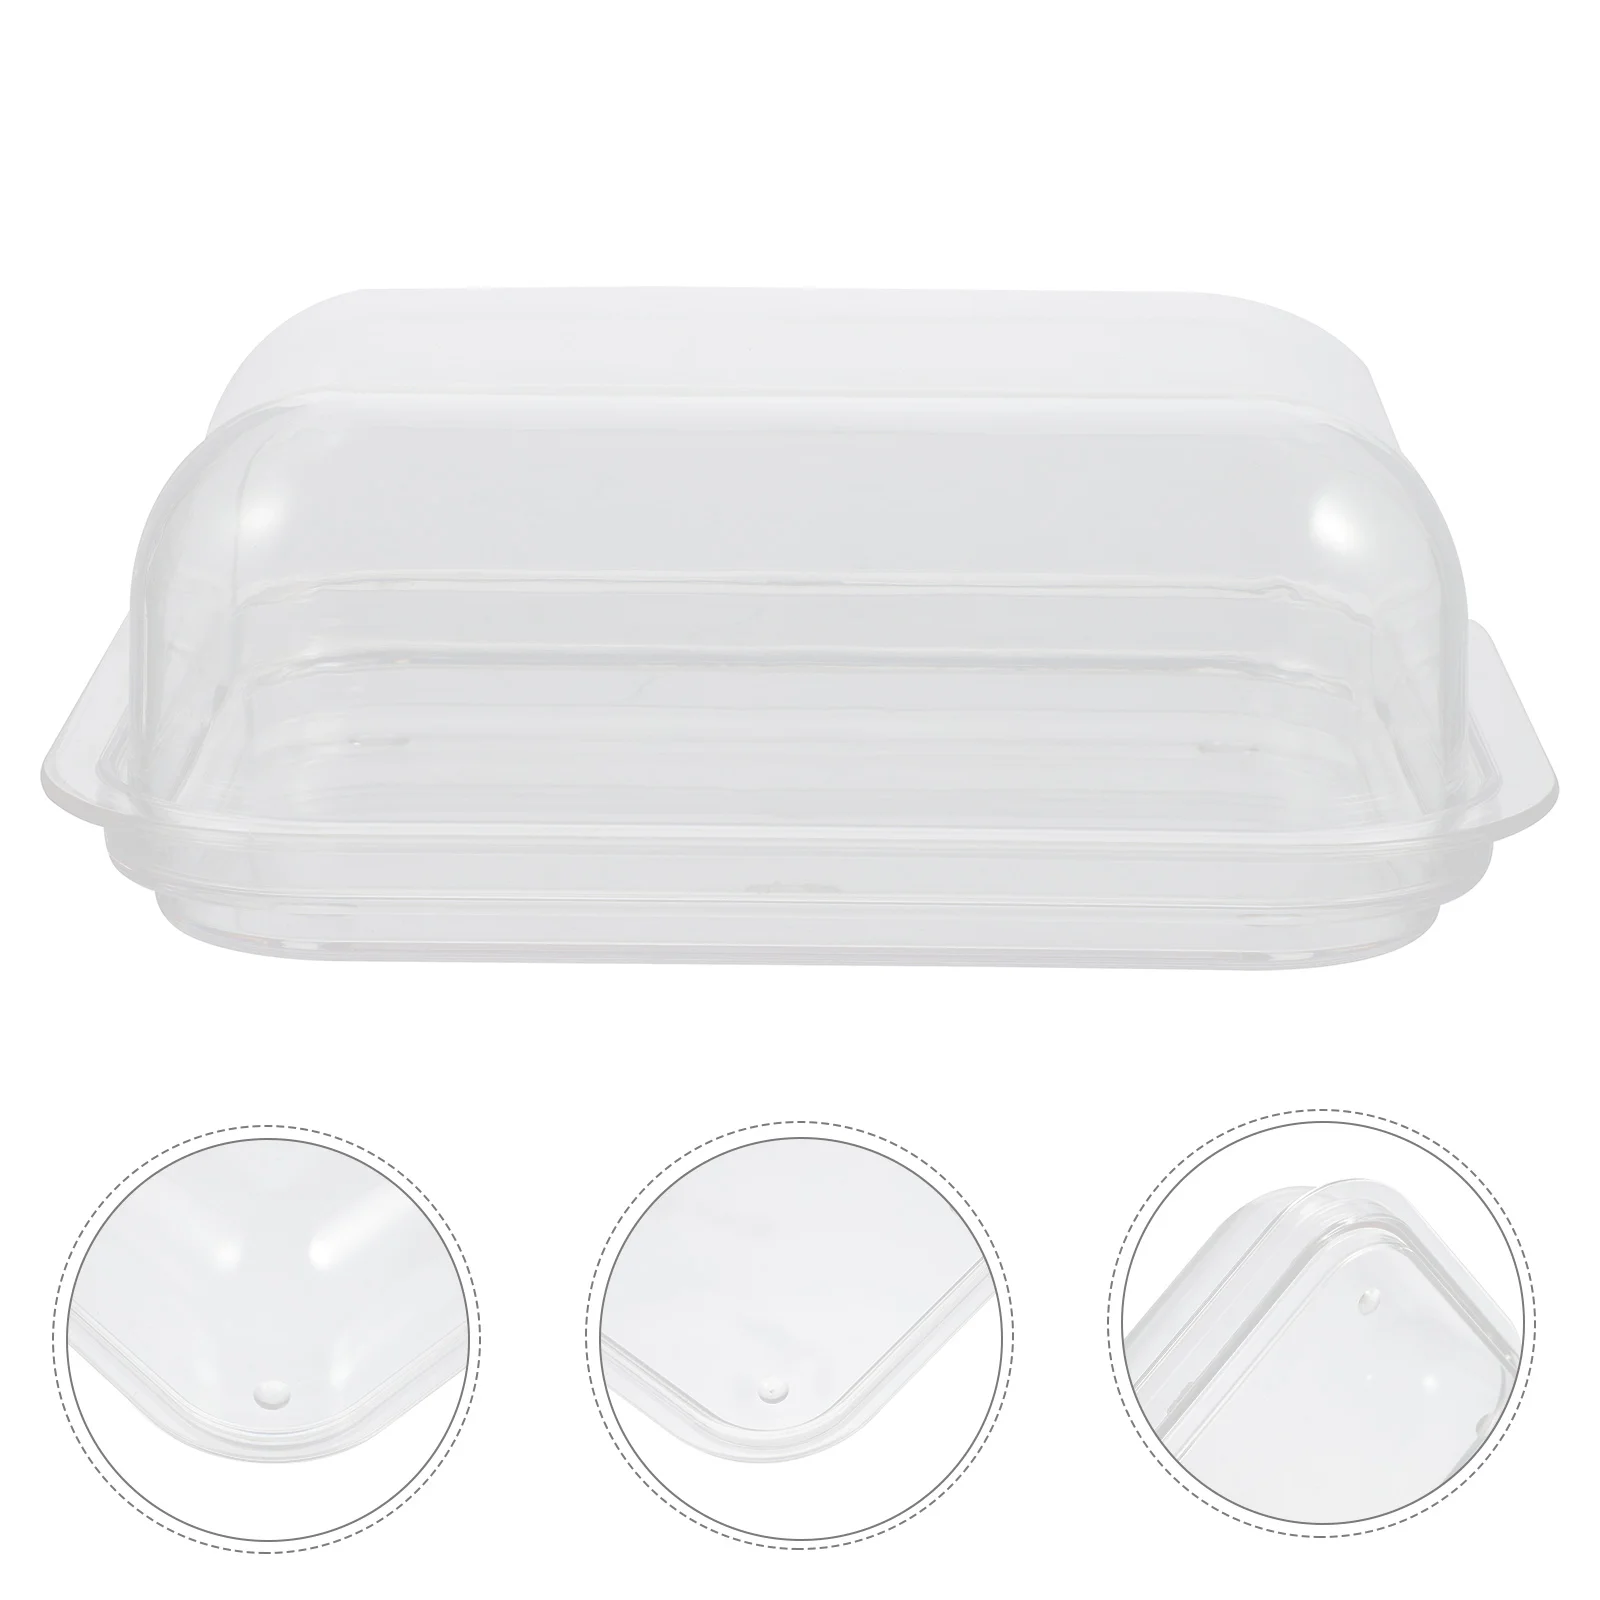 

Butter Dish Container Lid Keeper Holder Plate Cheese Box Tray Dishes Storage Serving Covered Dessert Refrigerator Plastic